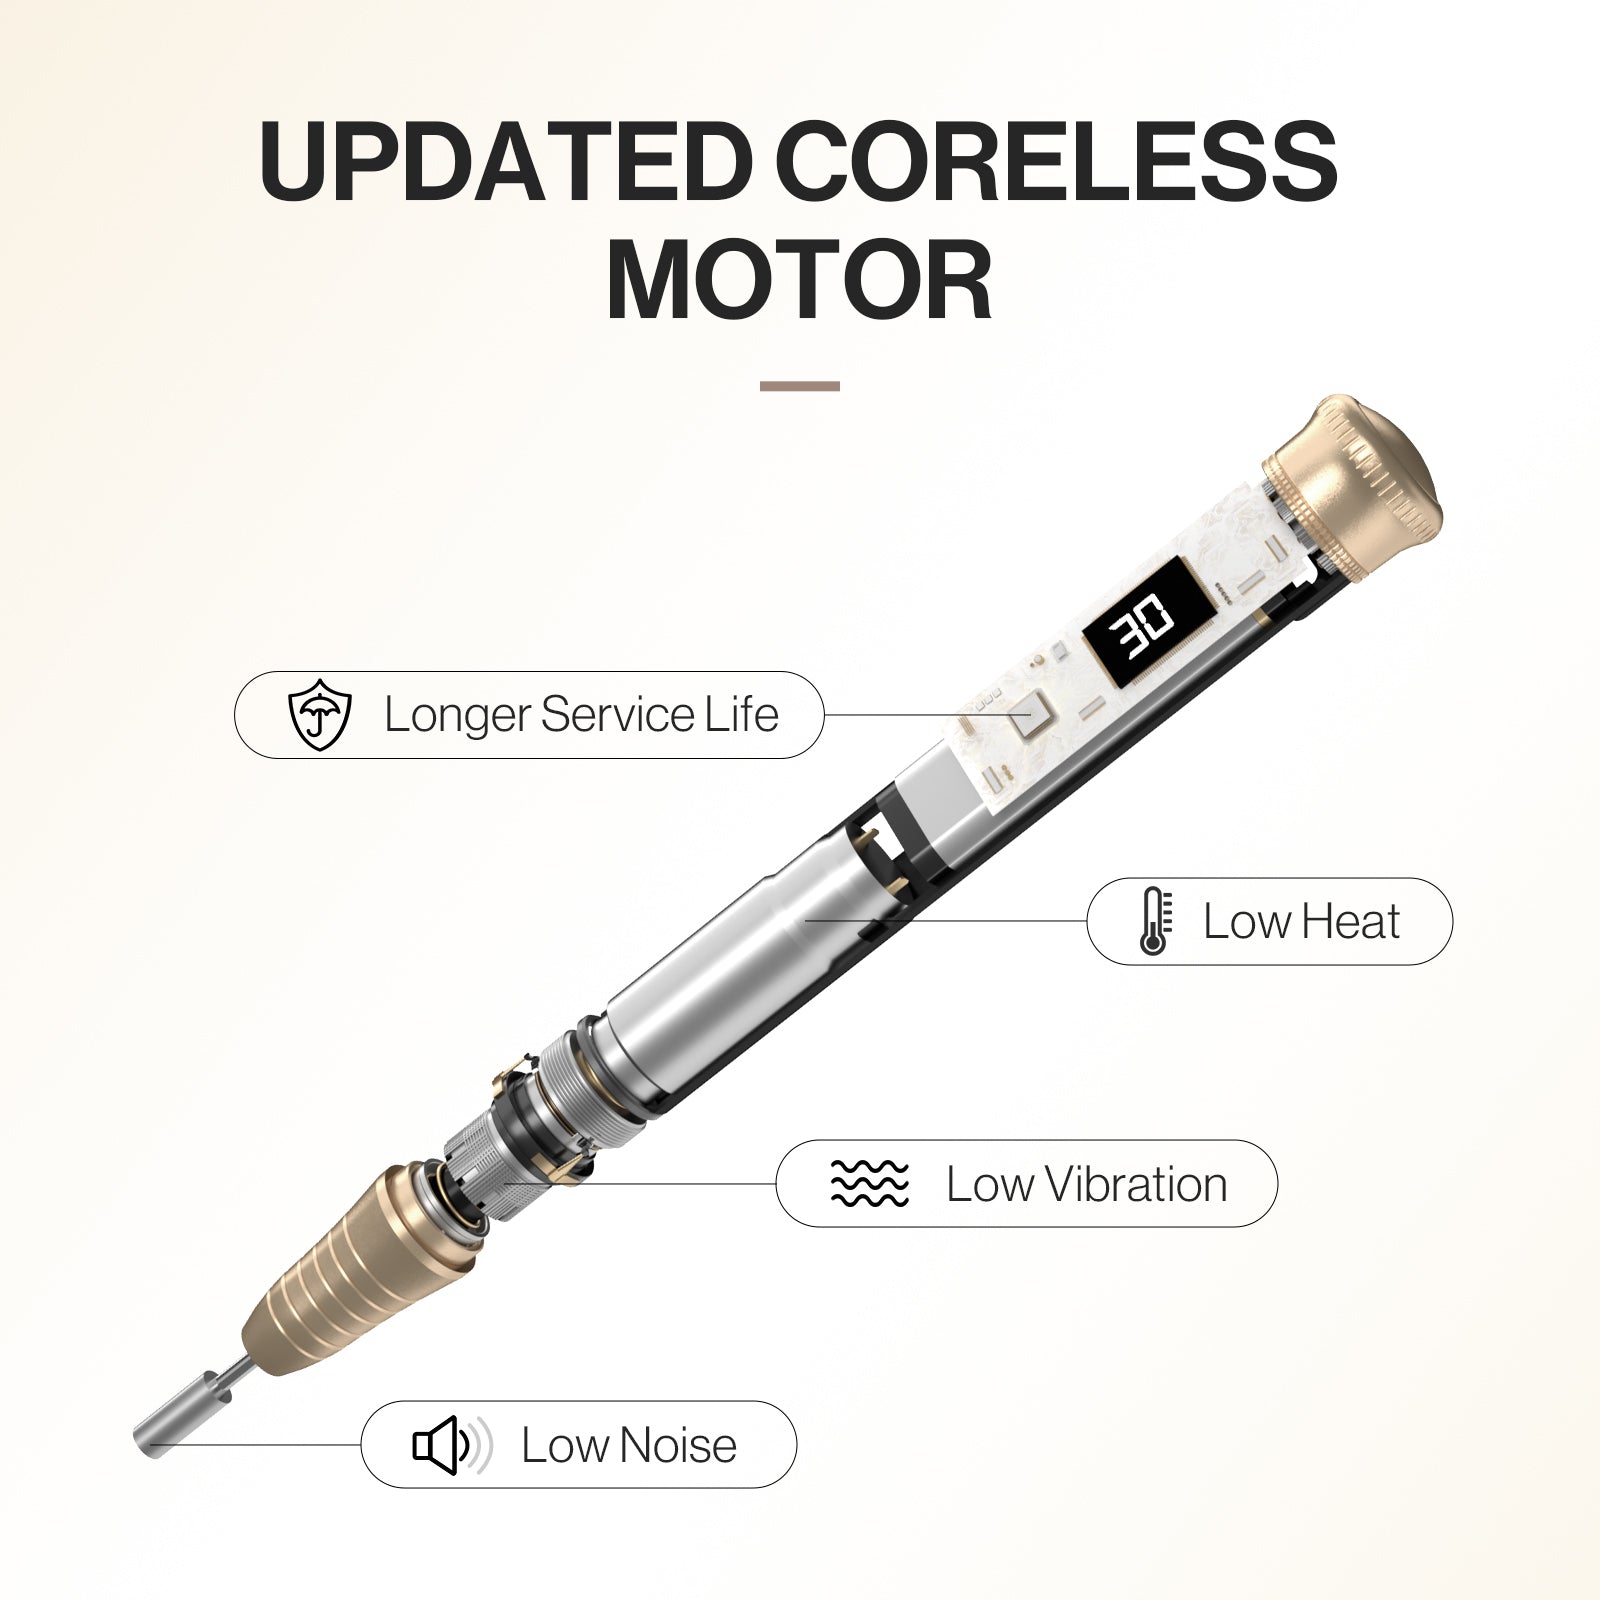 SP1 (S-M220E) Cordless & Stepless Speed Nail Drill 30000 RPM